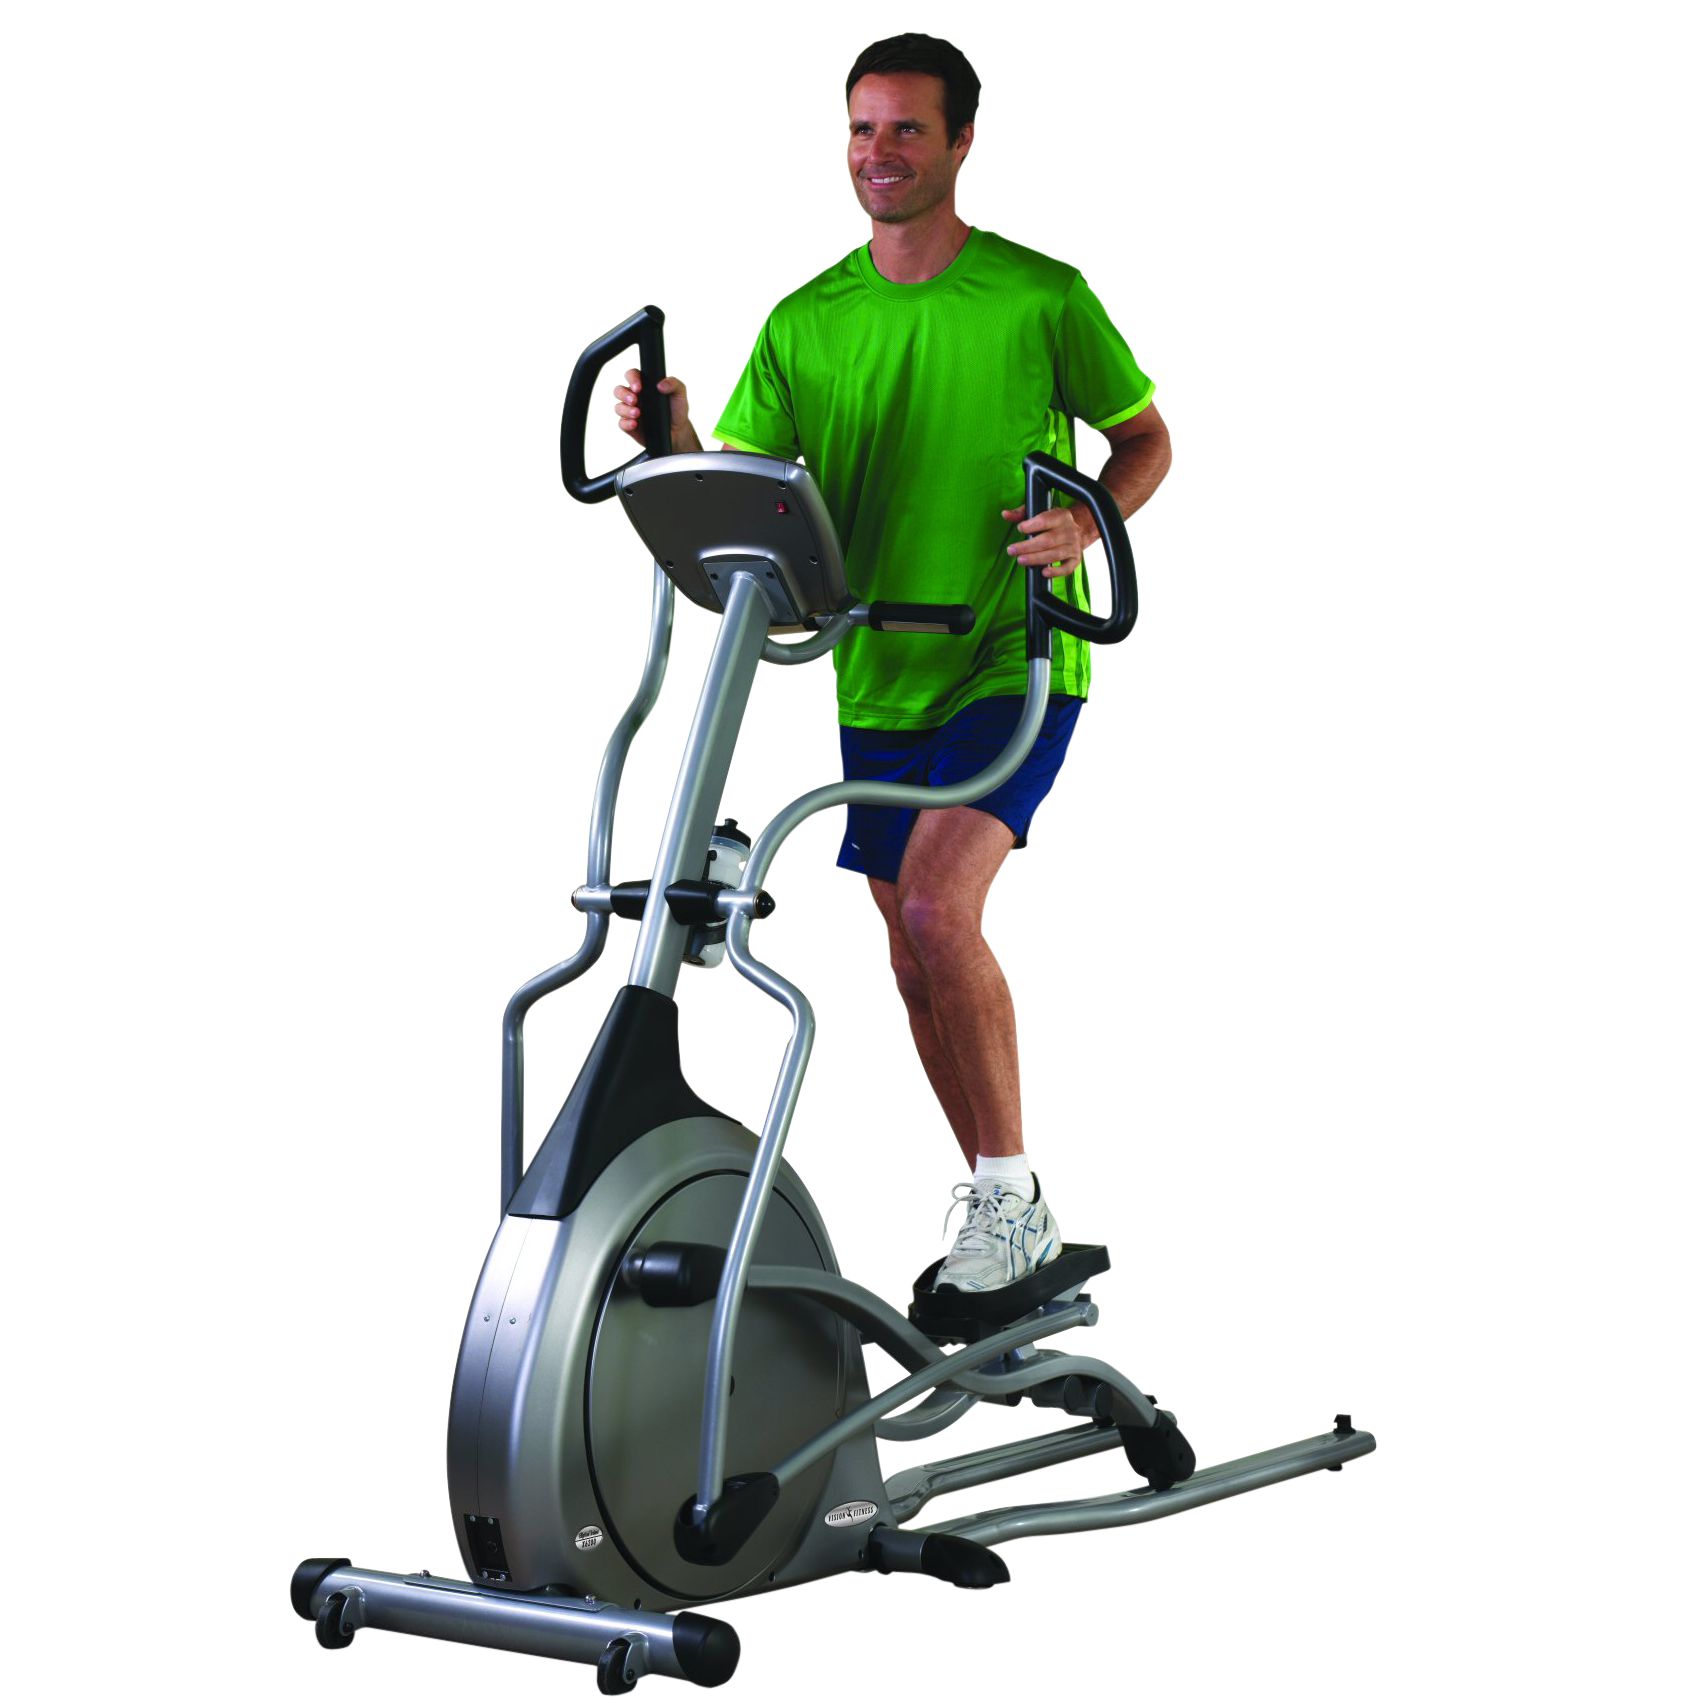 Vision Fitness X6200 Folding Elliptical Trainer with Simple Console at JohnLewis